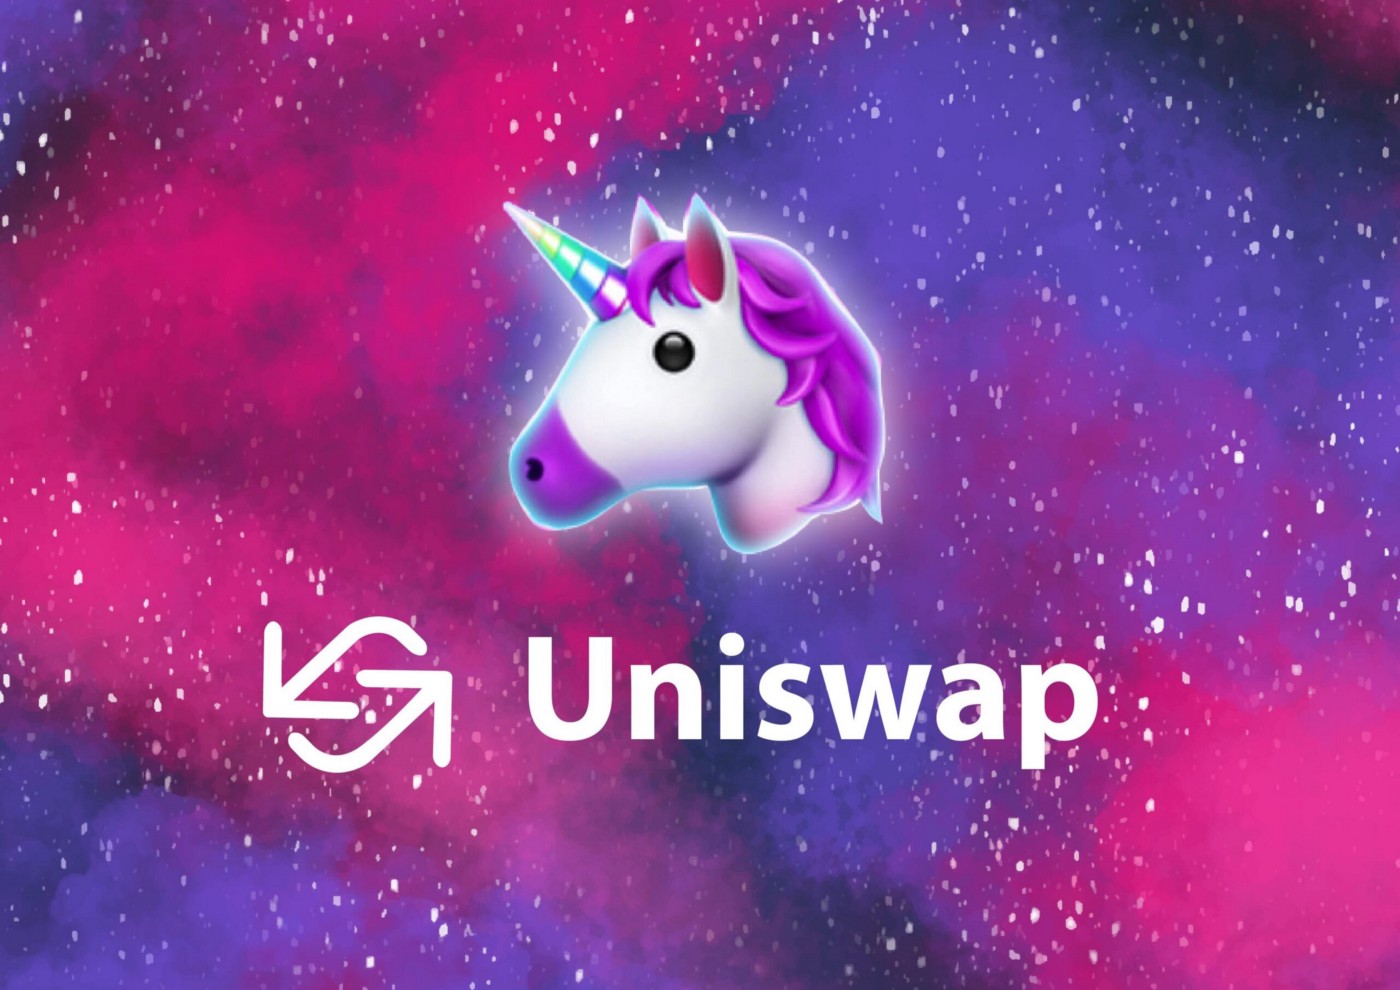 Picture of a Uniswap Unicorn, with the cosmos colored behind it